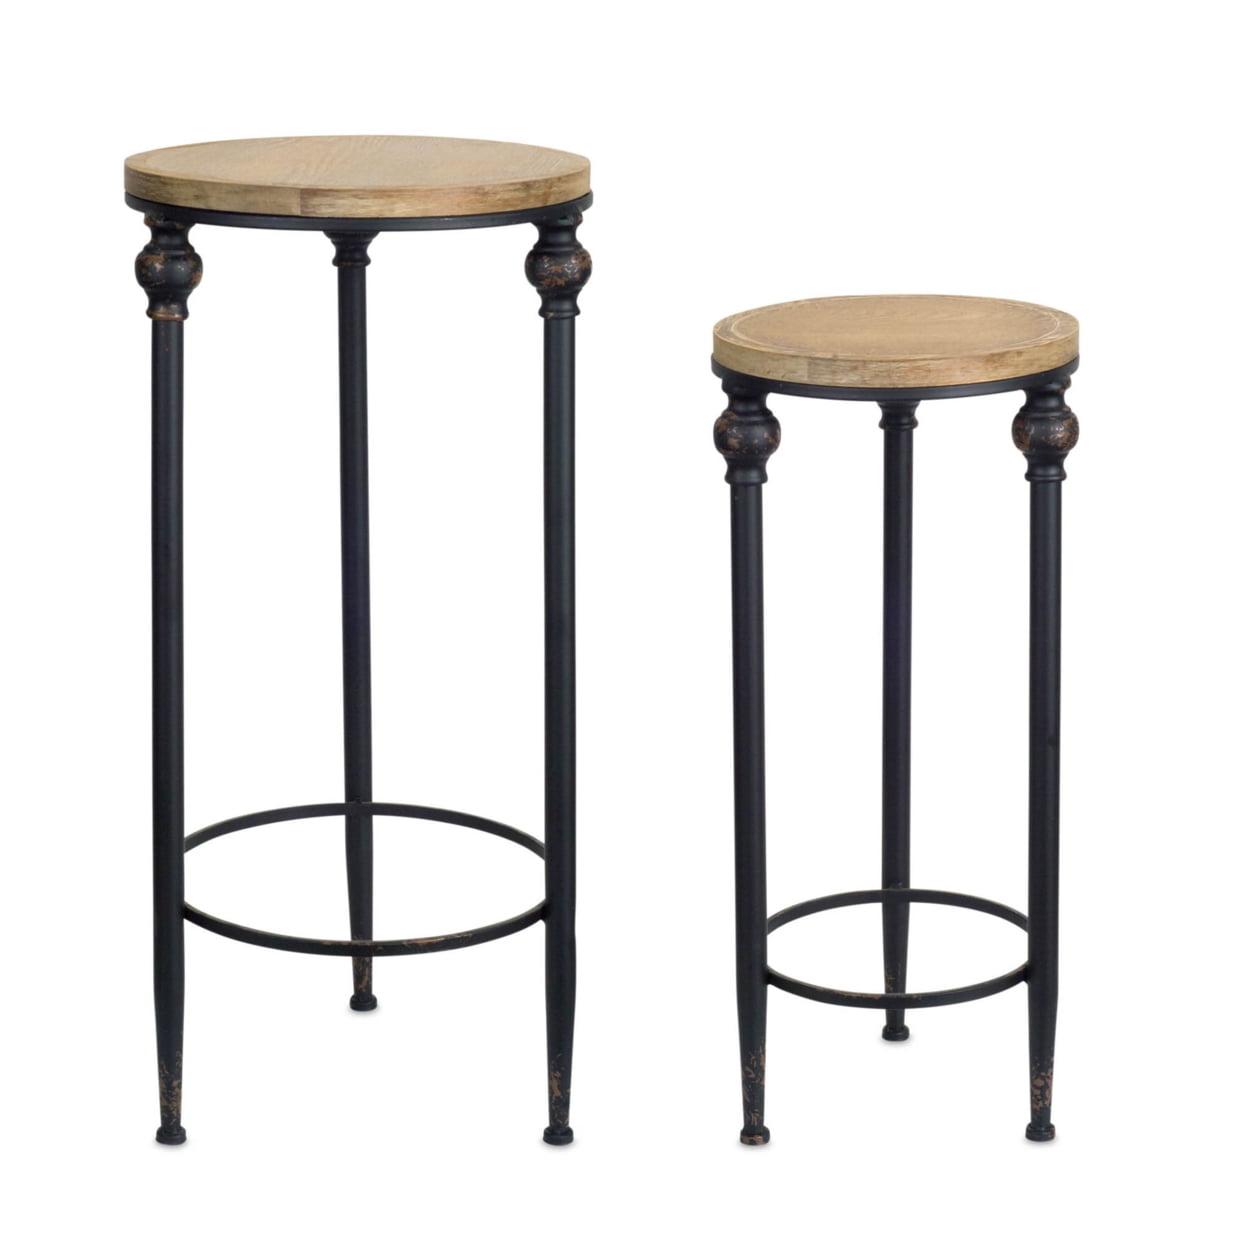 Rustic Charm Wood & Metal Nesting Accent Tables, Set of 2